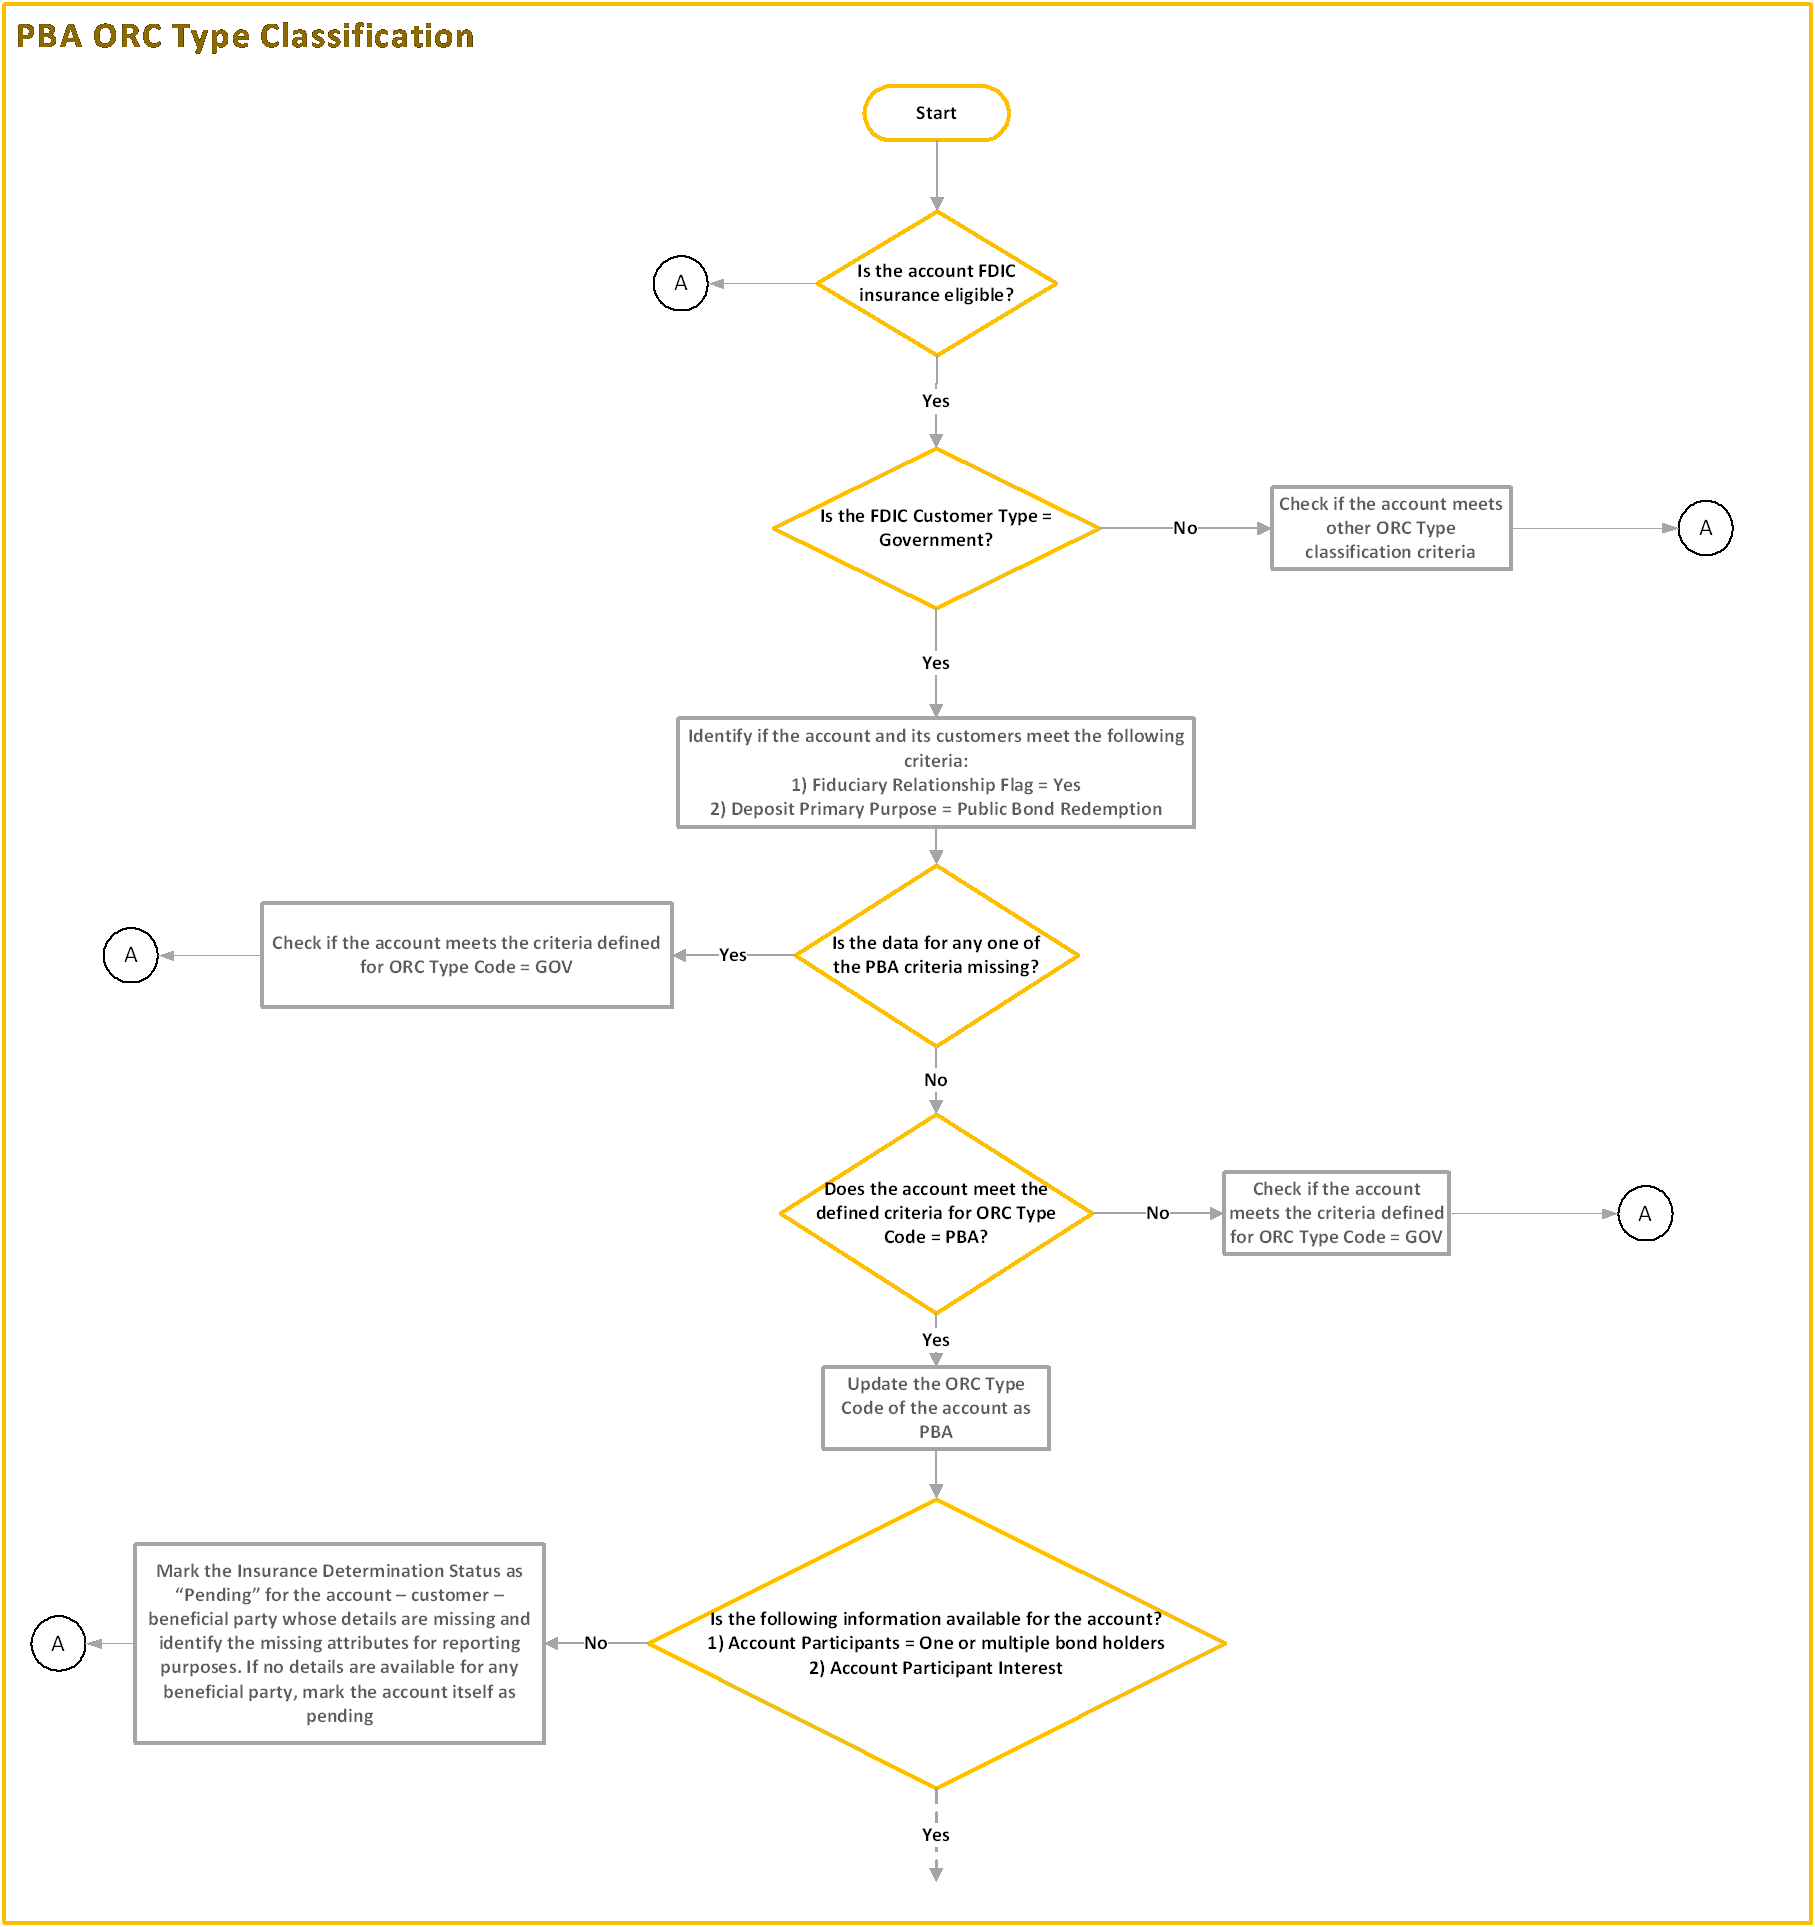 This image displays the Process Flow of PBA.